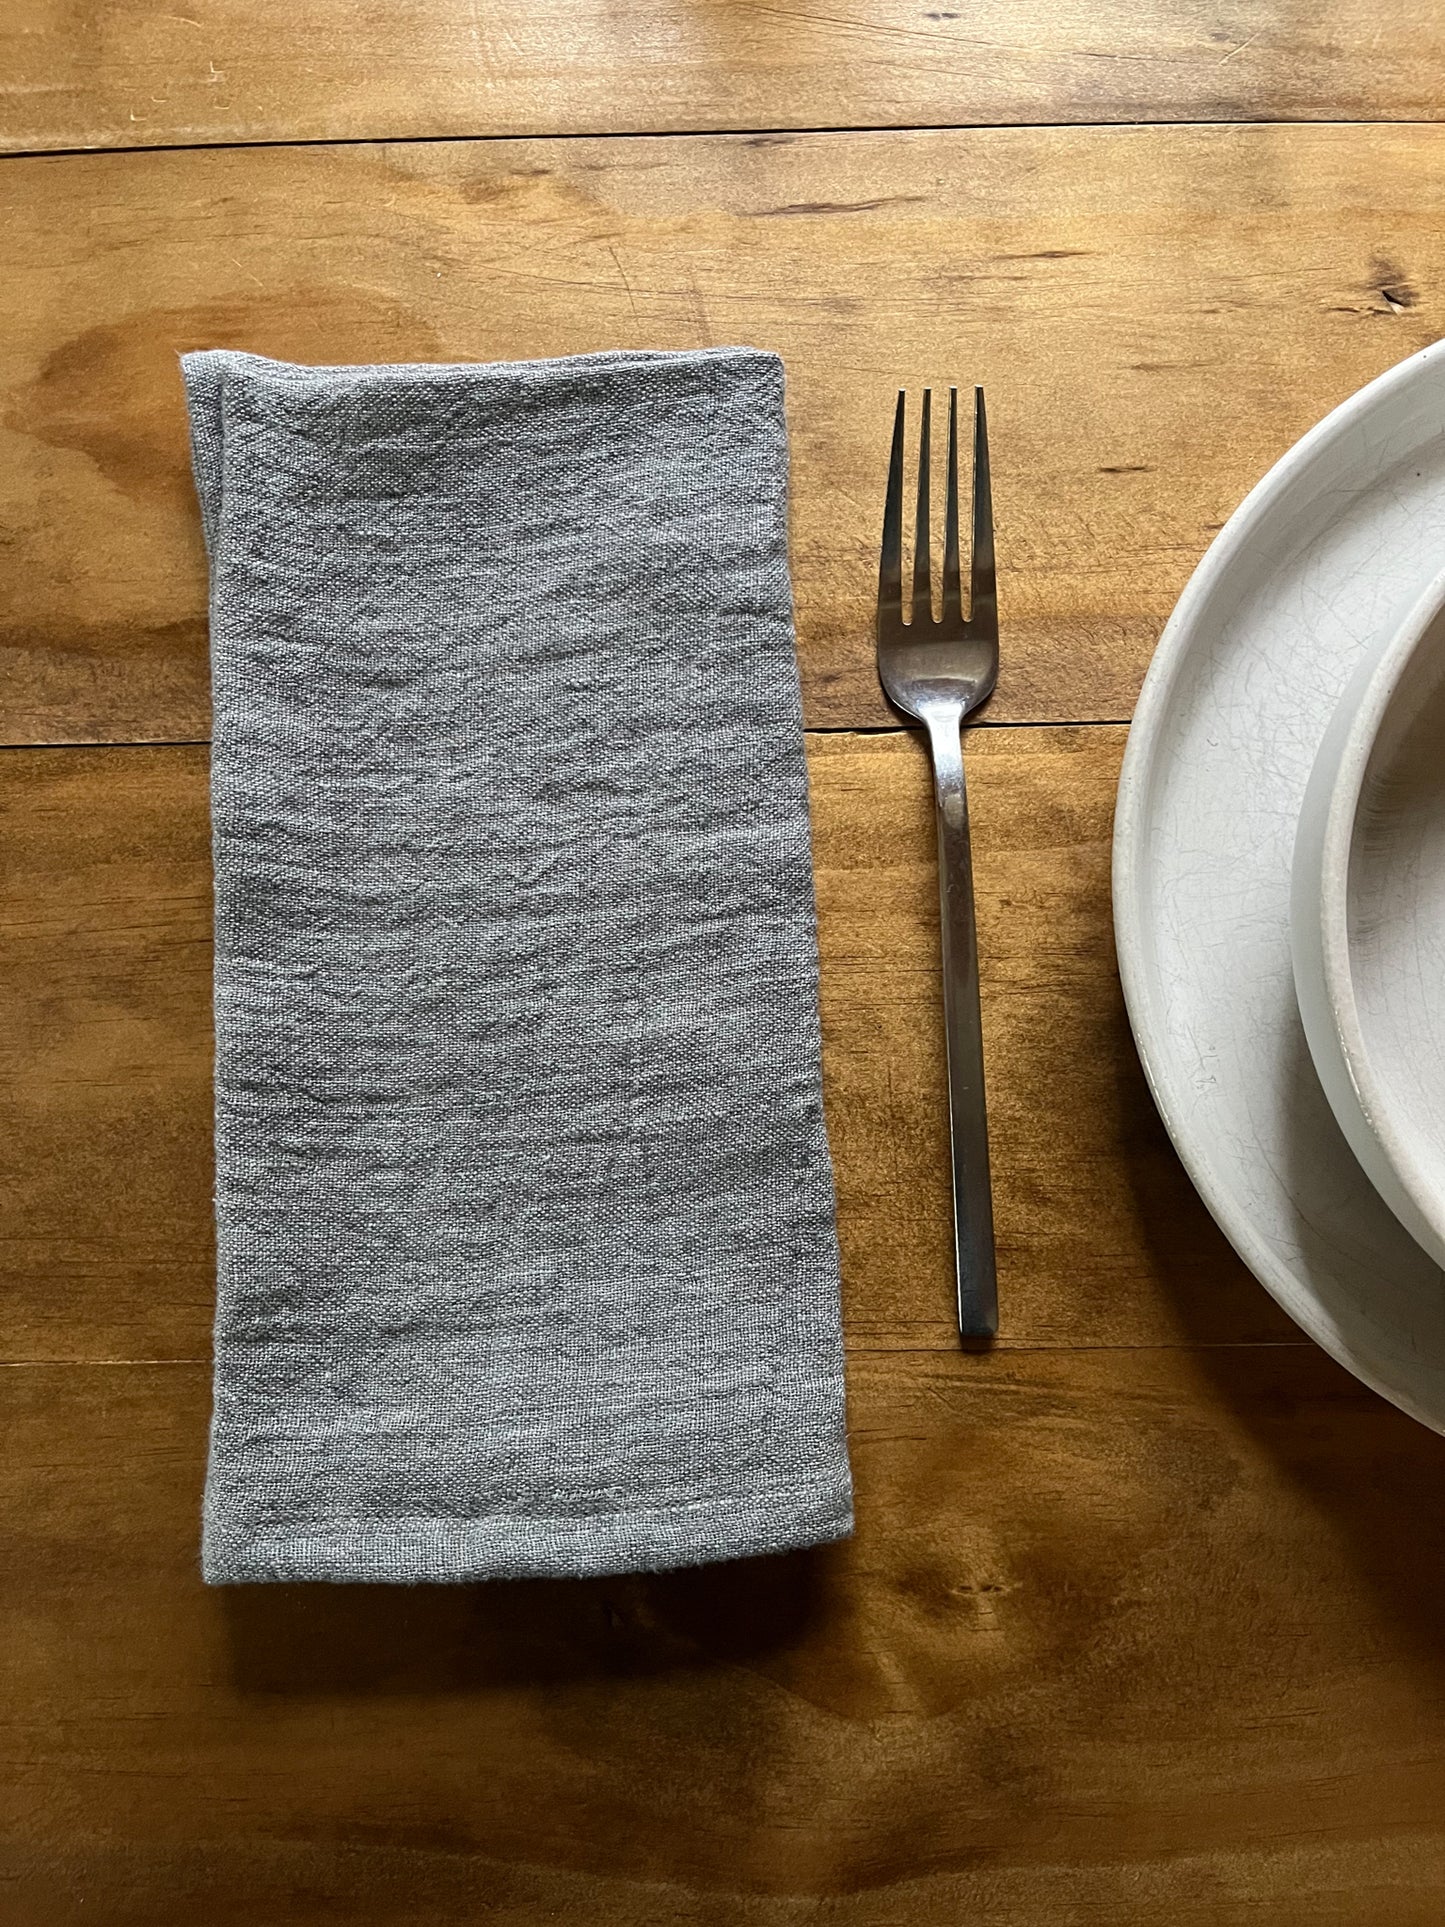 20-inch square stonewashed linen napkins with hemmed edge shown oyster gray